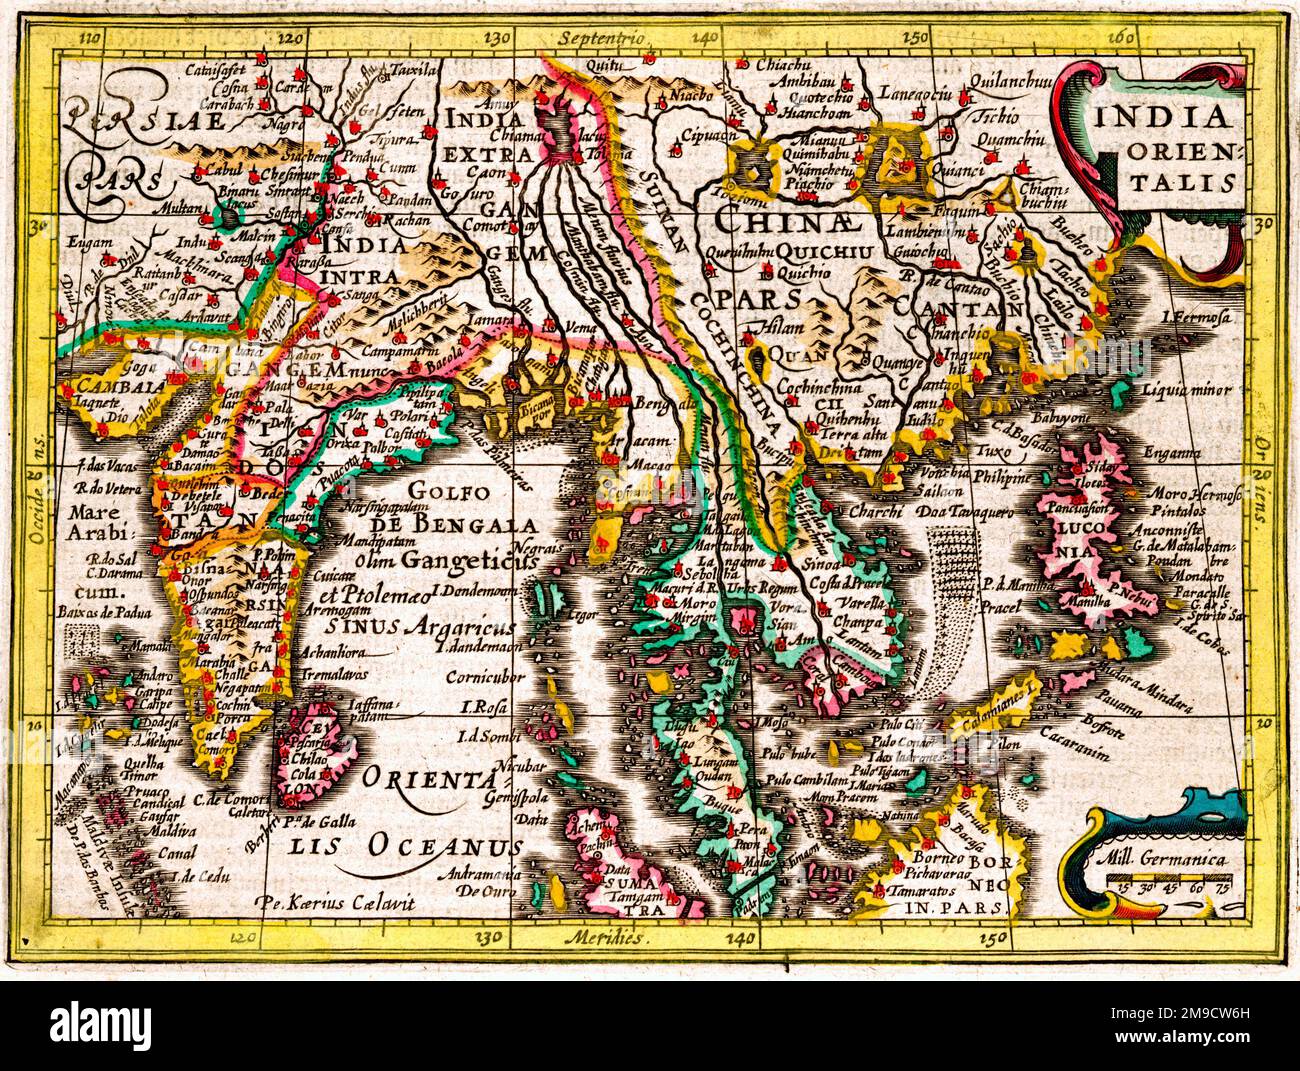 17th century Map of Asia, East Indies - India Orientales Stock Photo